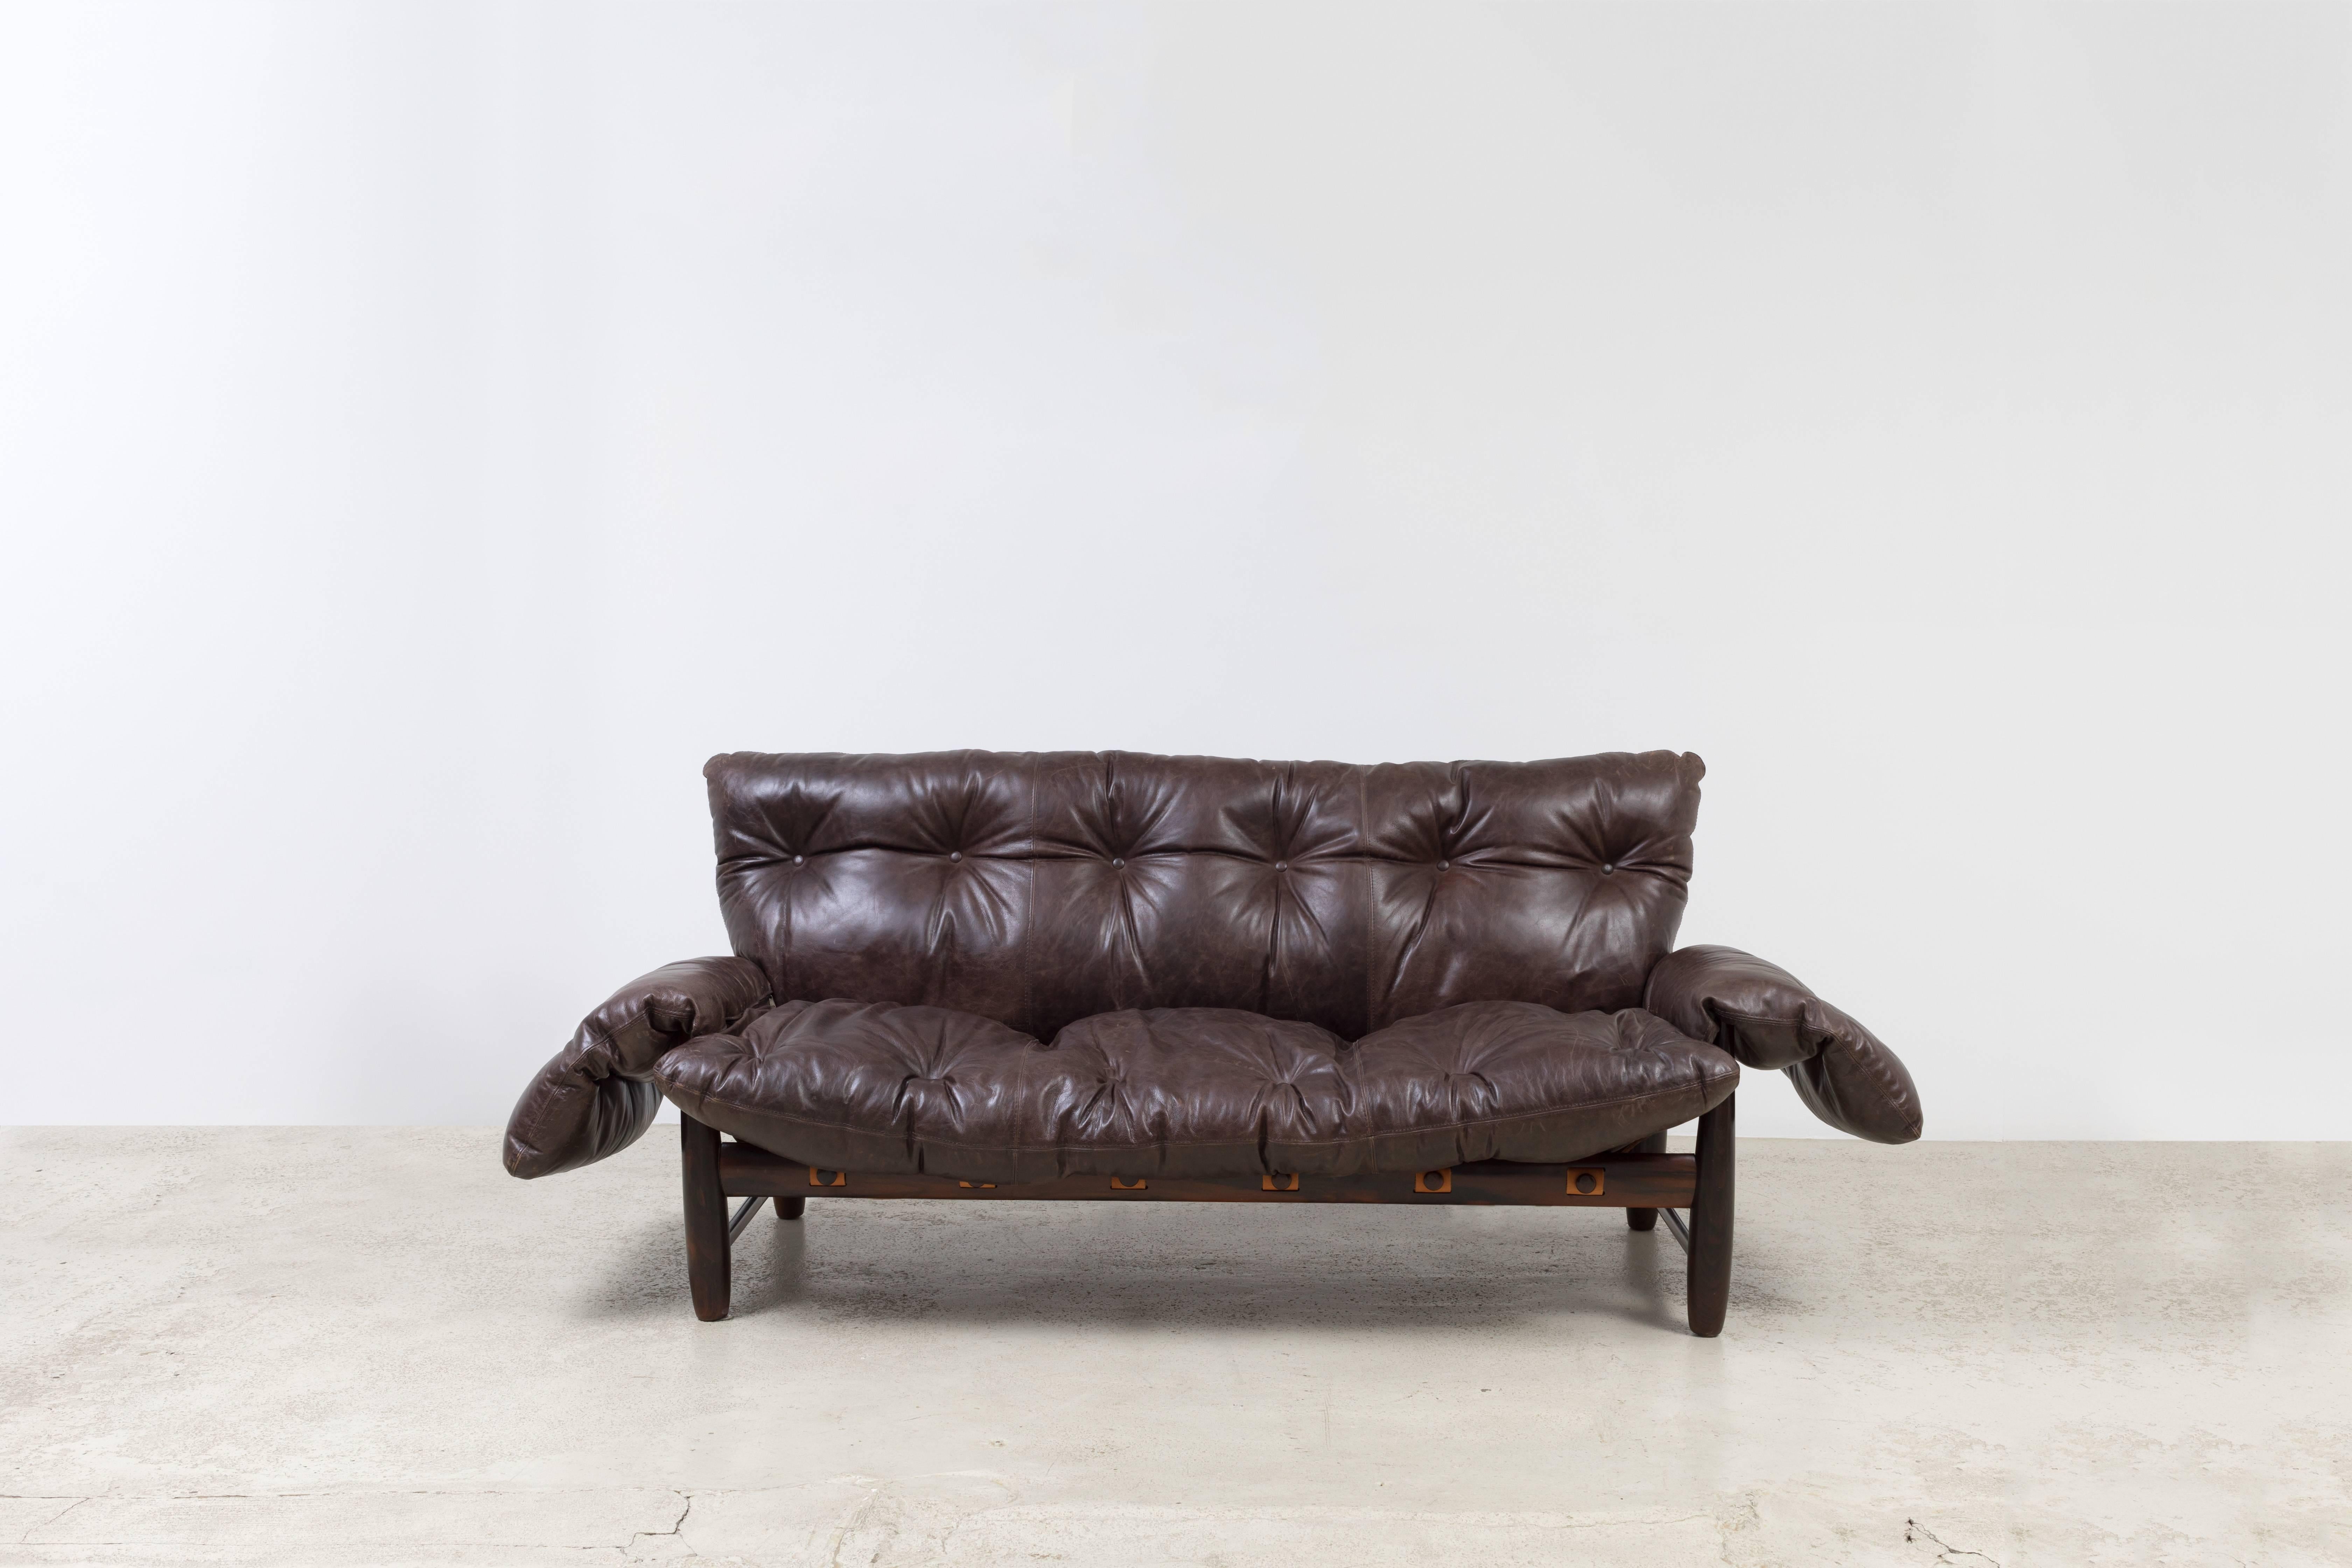 The sofa version for Rodrigues' signature piece. Designed in 1957, the 